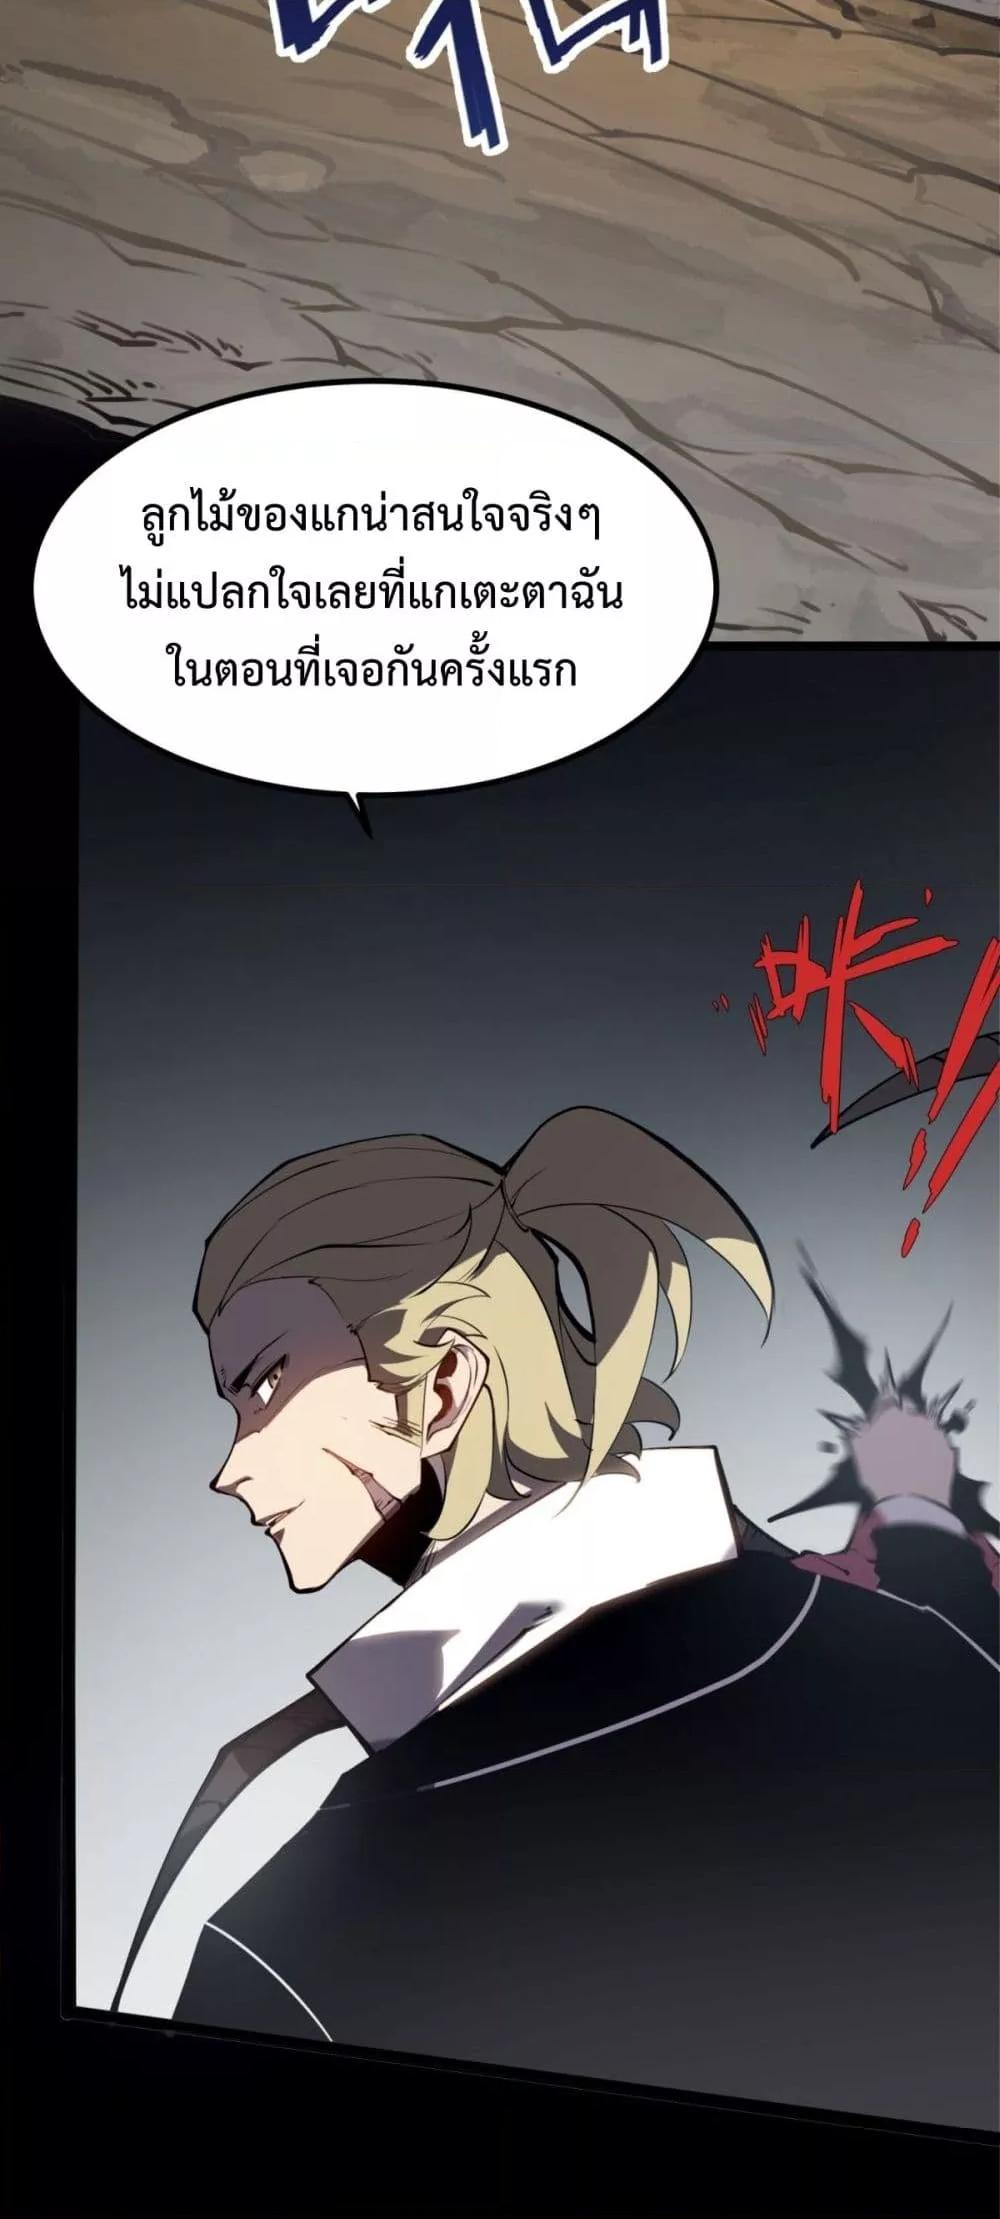 I Became The King by Scavenging โ€“ เนเธเนเธฅเน เน€เธฅเน€เธงเนเธฅเธฅเธฃเธดเนเธ เธ•เธญเธเธ—เธตเน 17 (33)